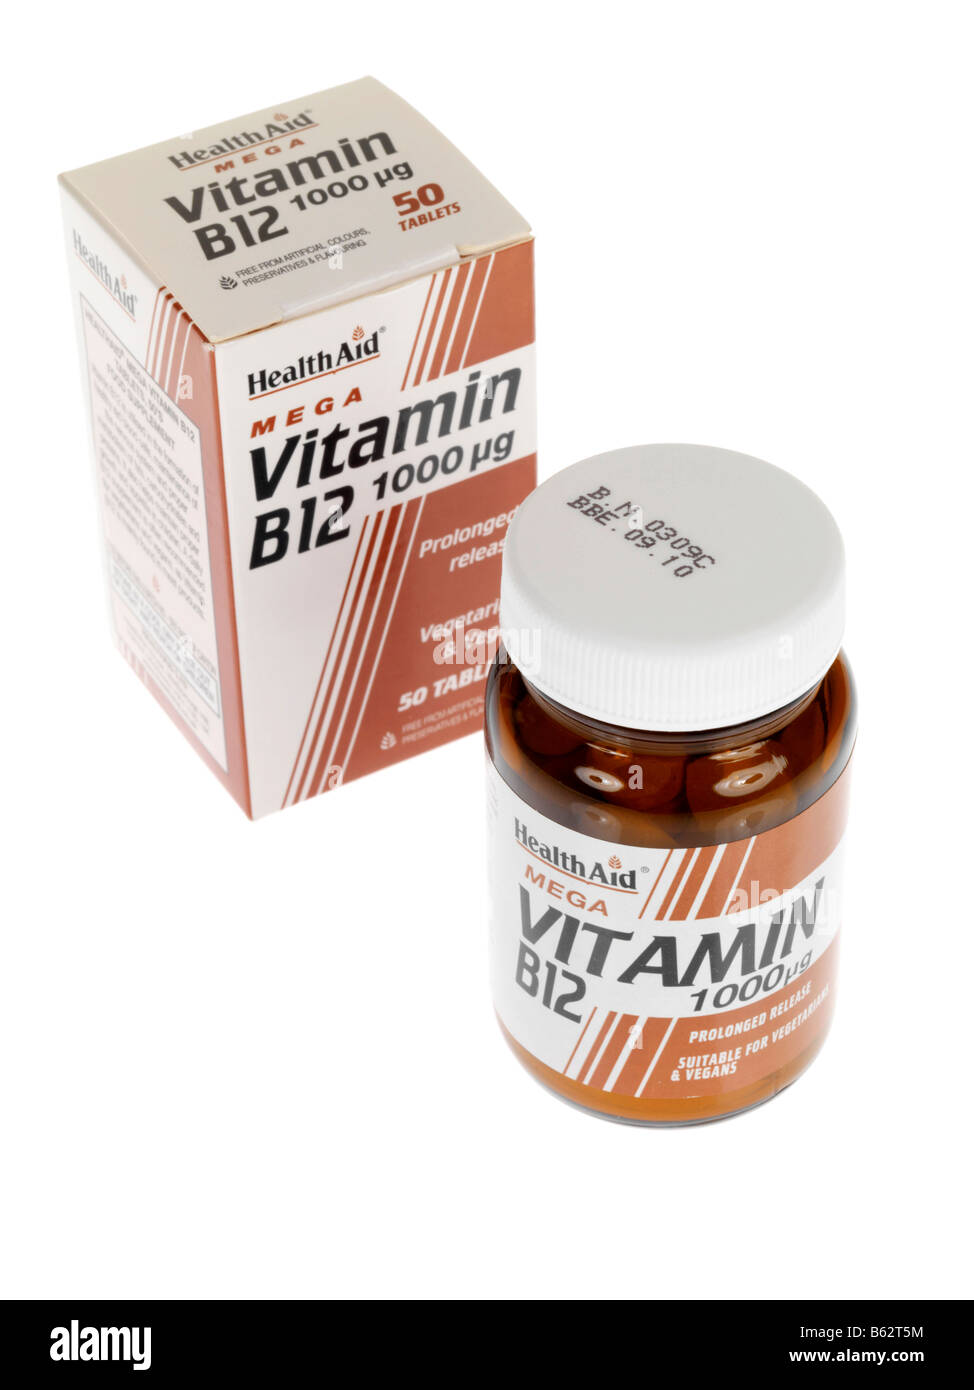 Branded Packaging Od Health Aid Vitamin B12 Pills Or Tablets Suitable For Vegans Or Vegetarians Isolated Against A White Background With No People Stock Photo